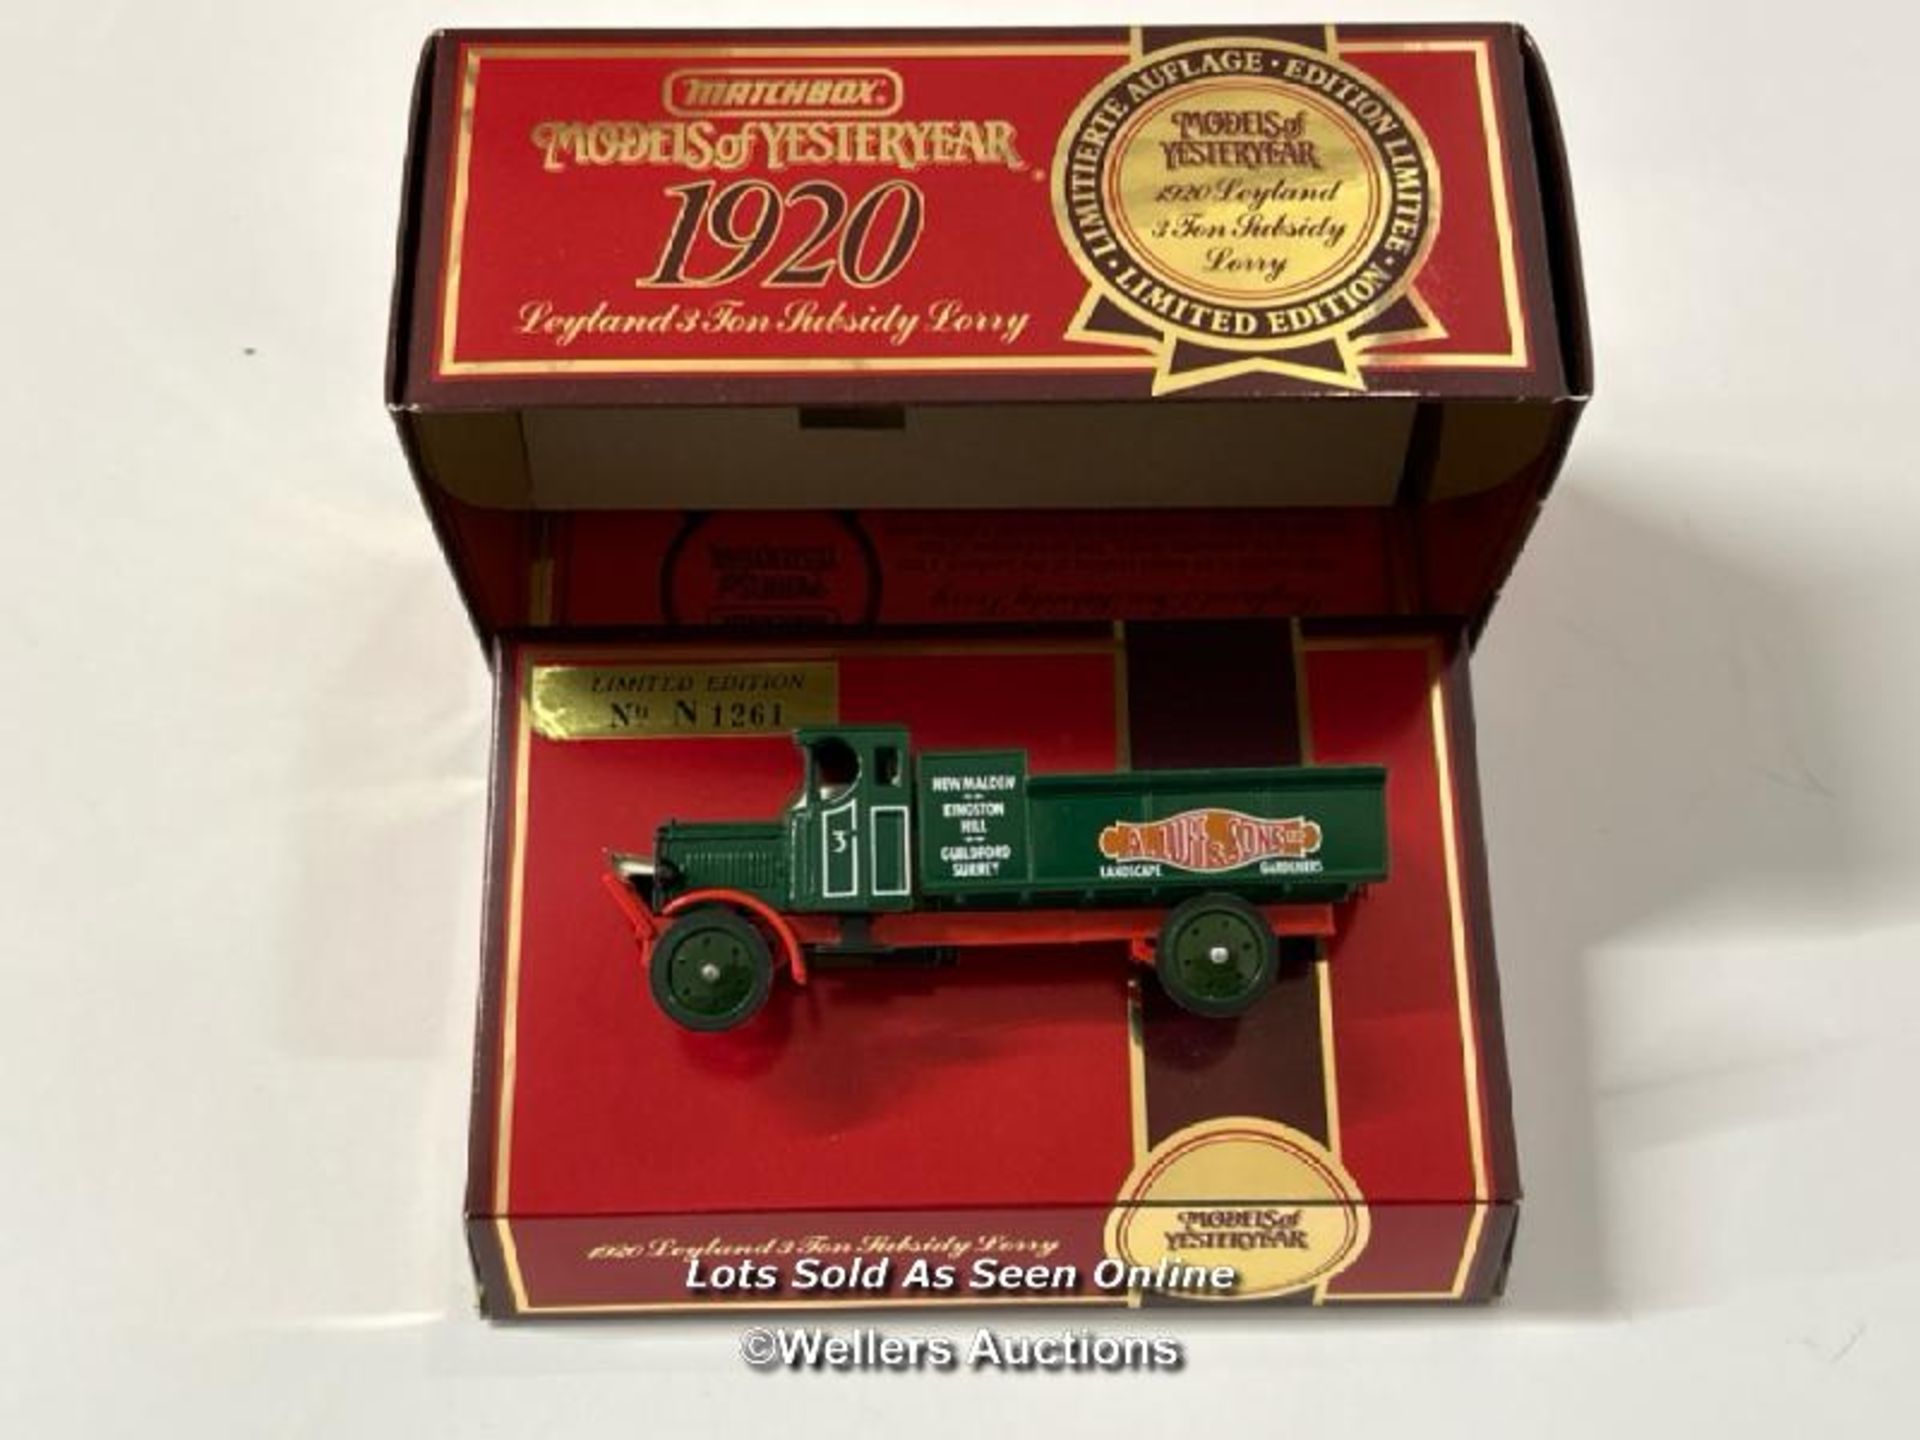 Matchbox Models of Yesteryear 1920 , Layland 3 Ton "A.Luff & Sons" Lorry Y-9, Limited edition, boxed